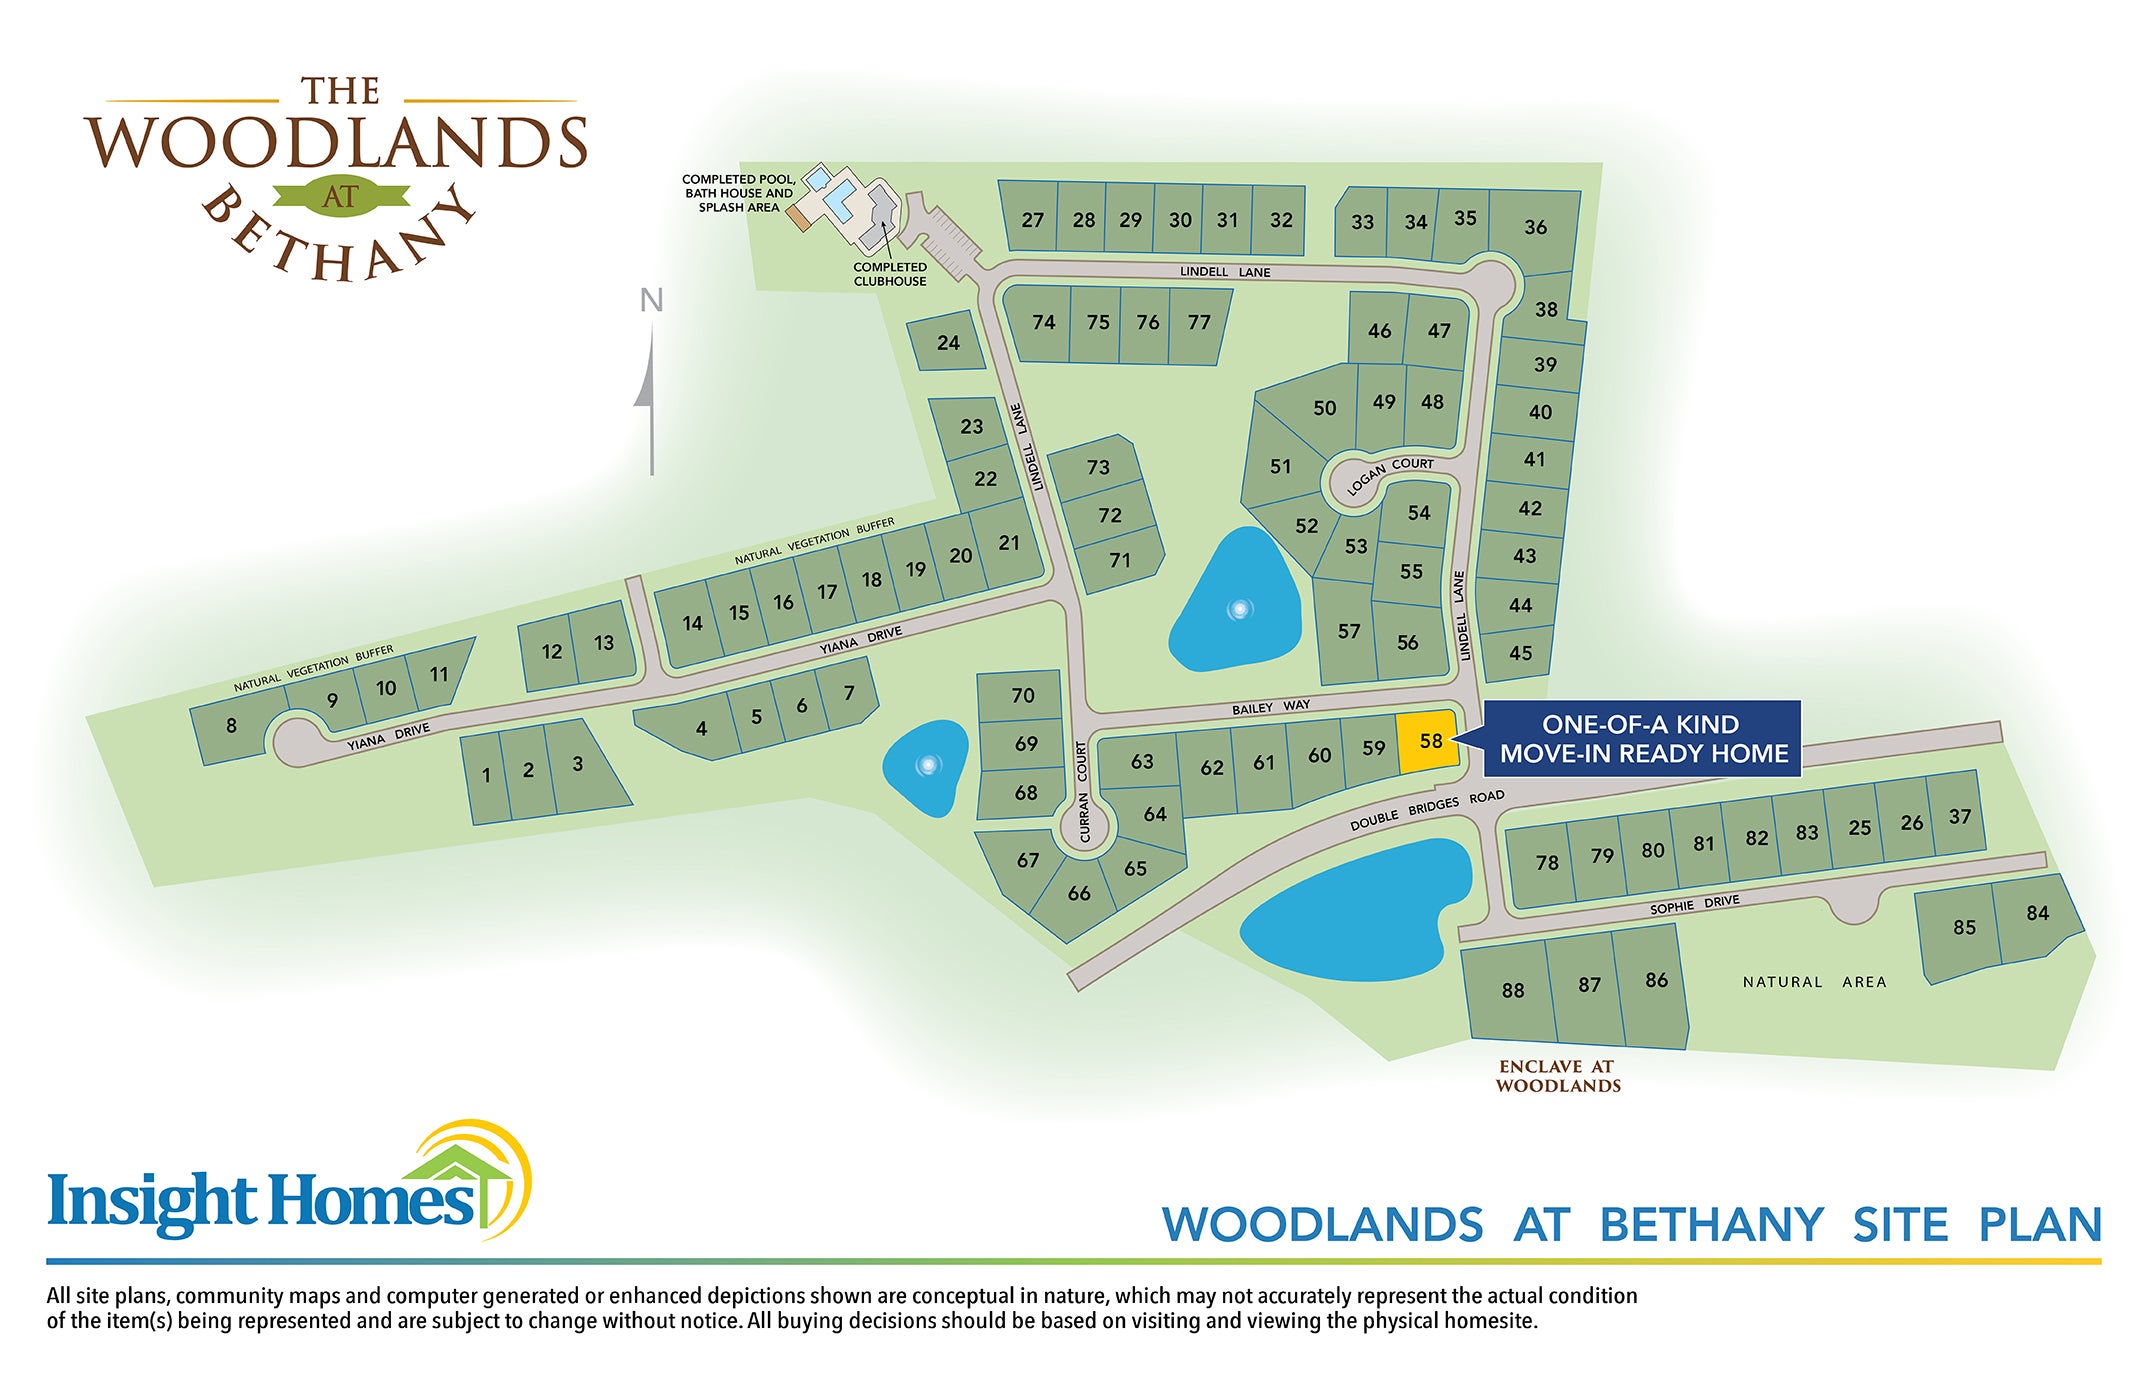 Woodlands at Bethany Siteplan